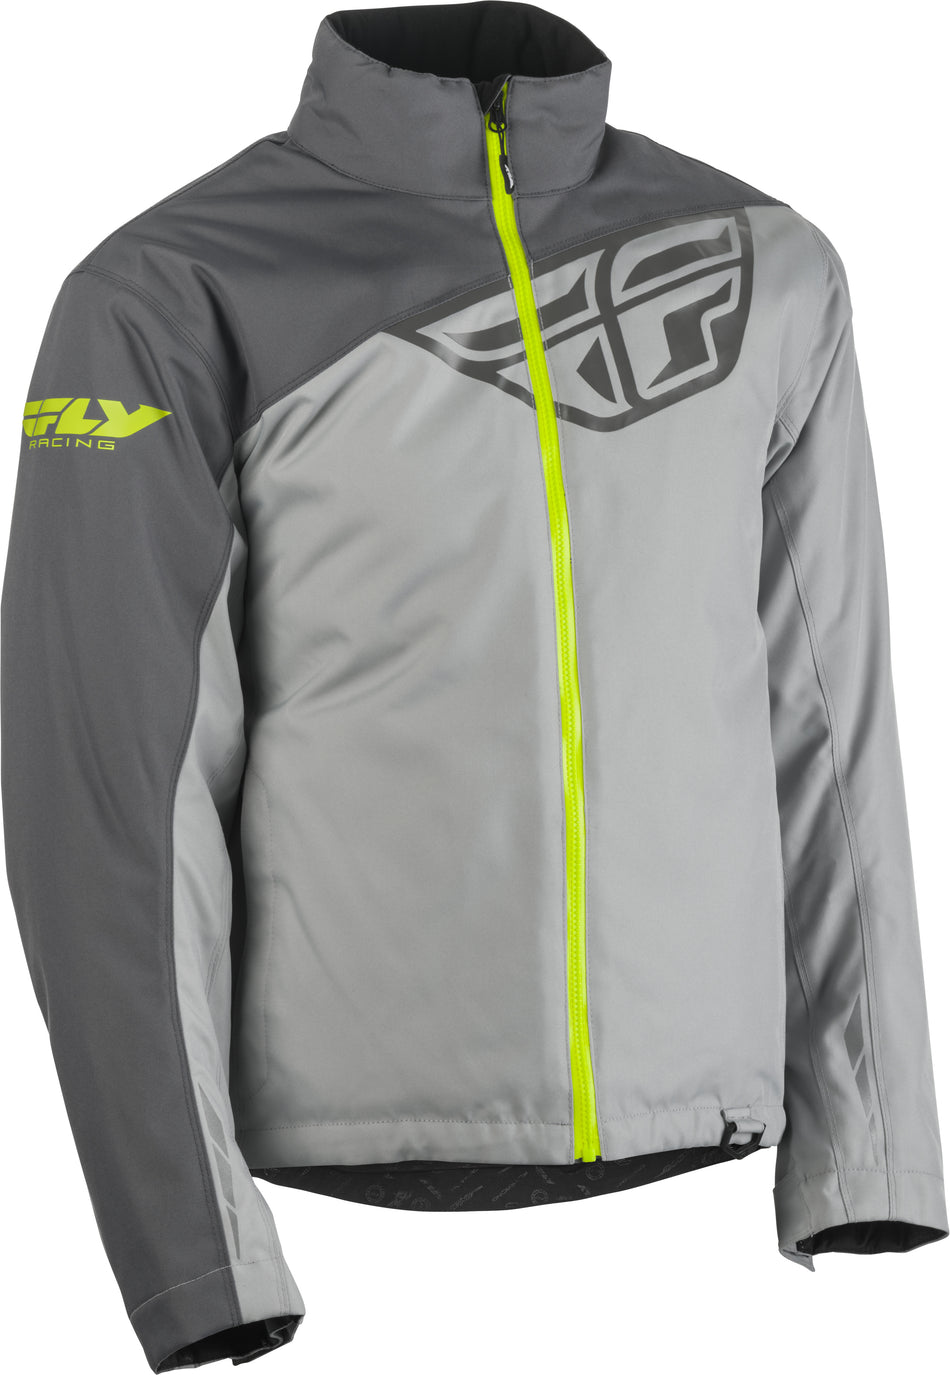 FLY RACING Fly Aurora Jacket Charcoal/Grey Md 470-4121M